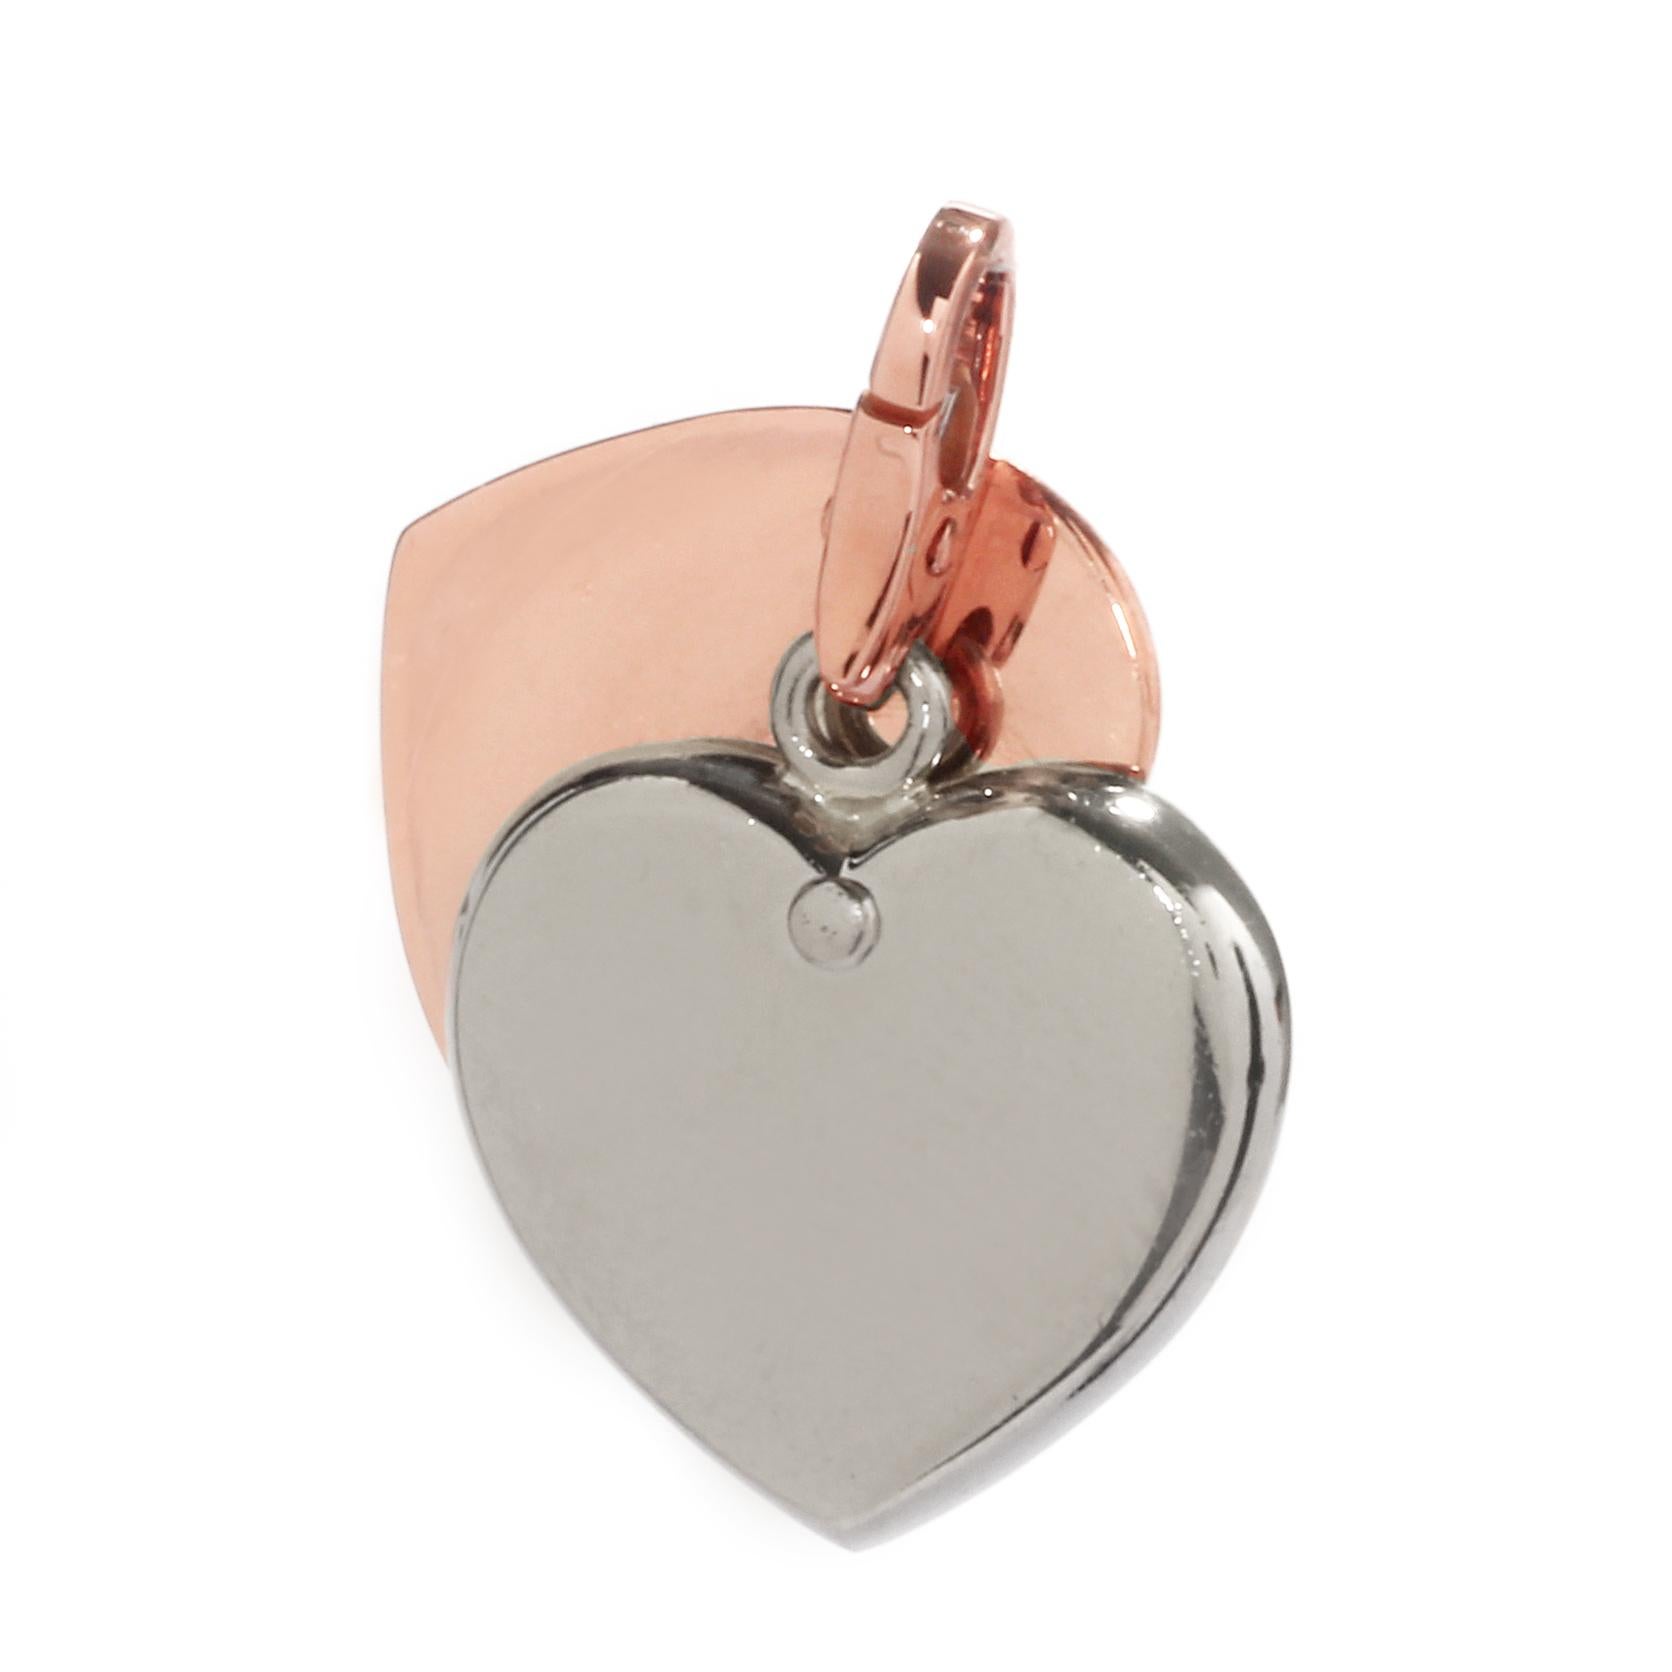 A lovely heart charm pendant by Cartier featuring 18k white and rose gold, forming a perfect colorful combination.

Hallmarks: Cartier, 750, Unique Serial Number
Weight: 14.4 Grams
Dimensions: .74″ Inches wide by 1.14″ Inches in